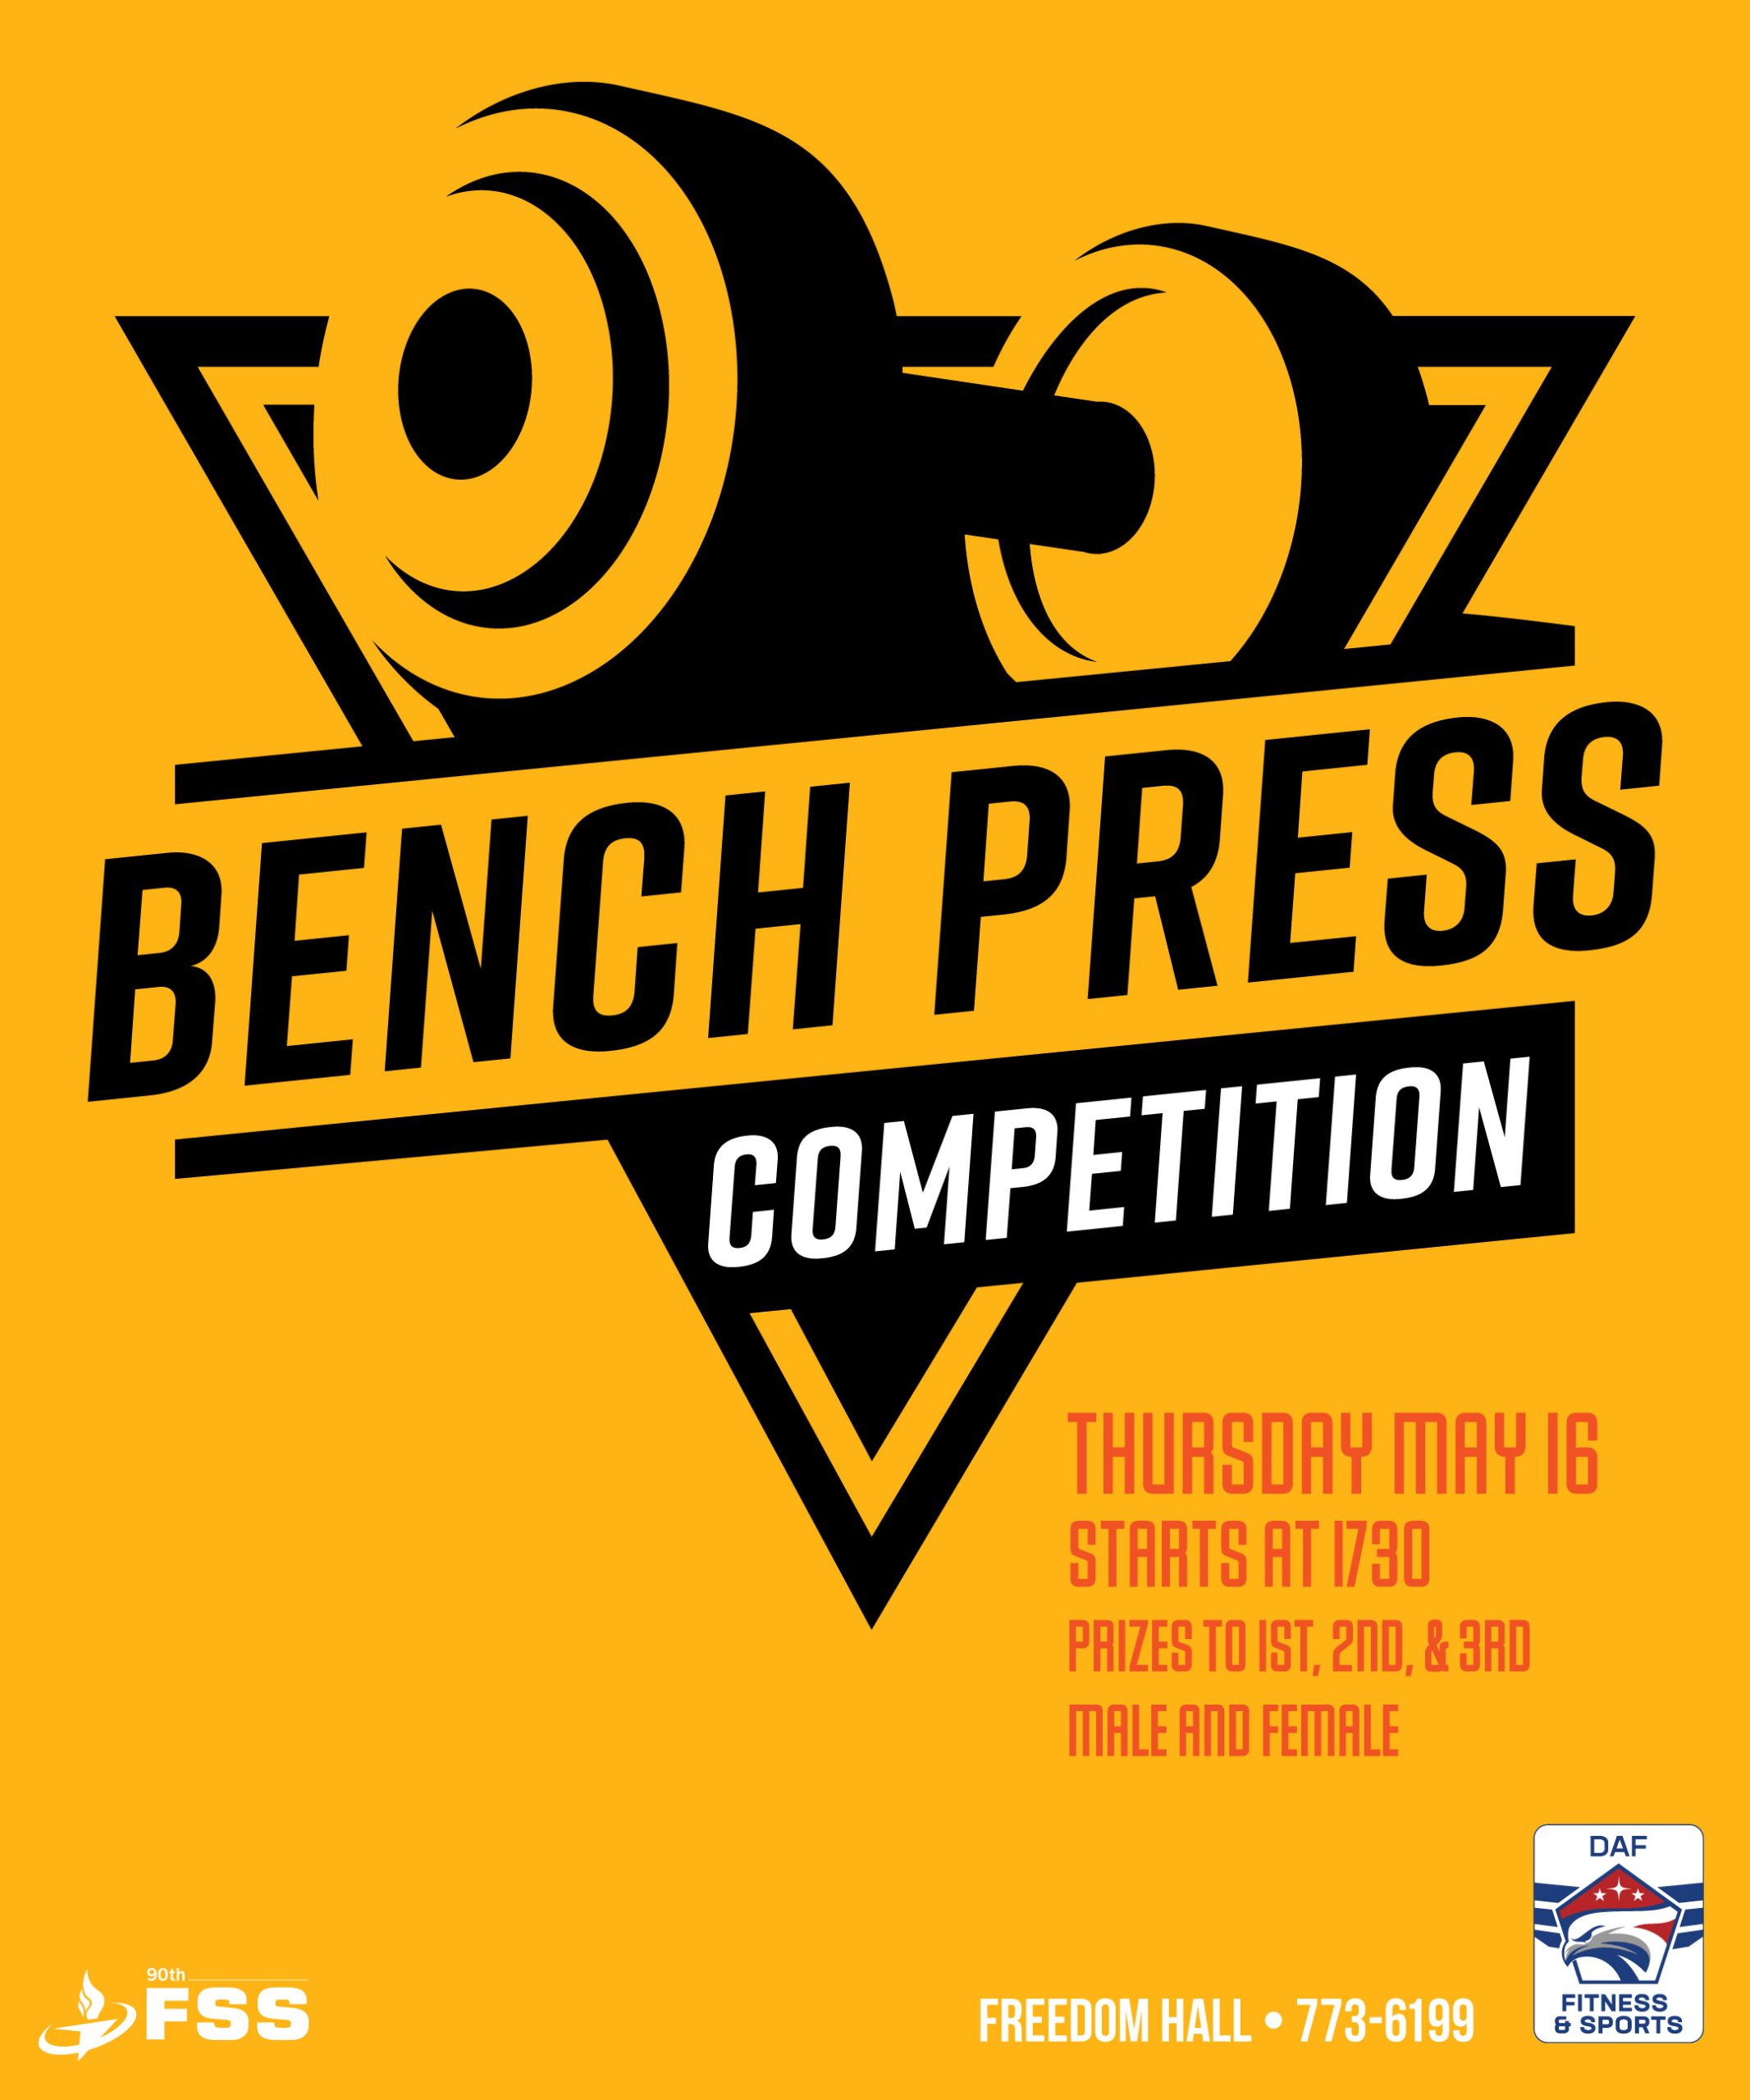 Bench Press Competition